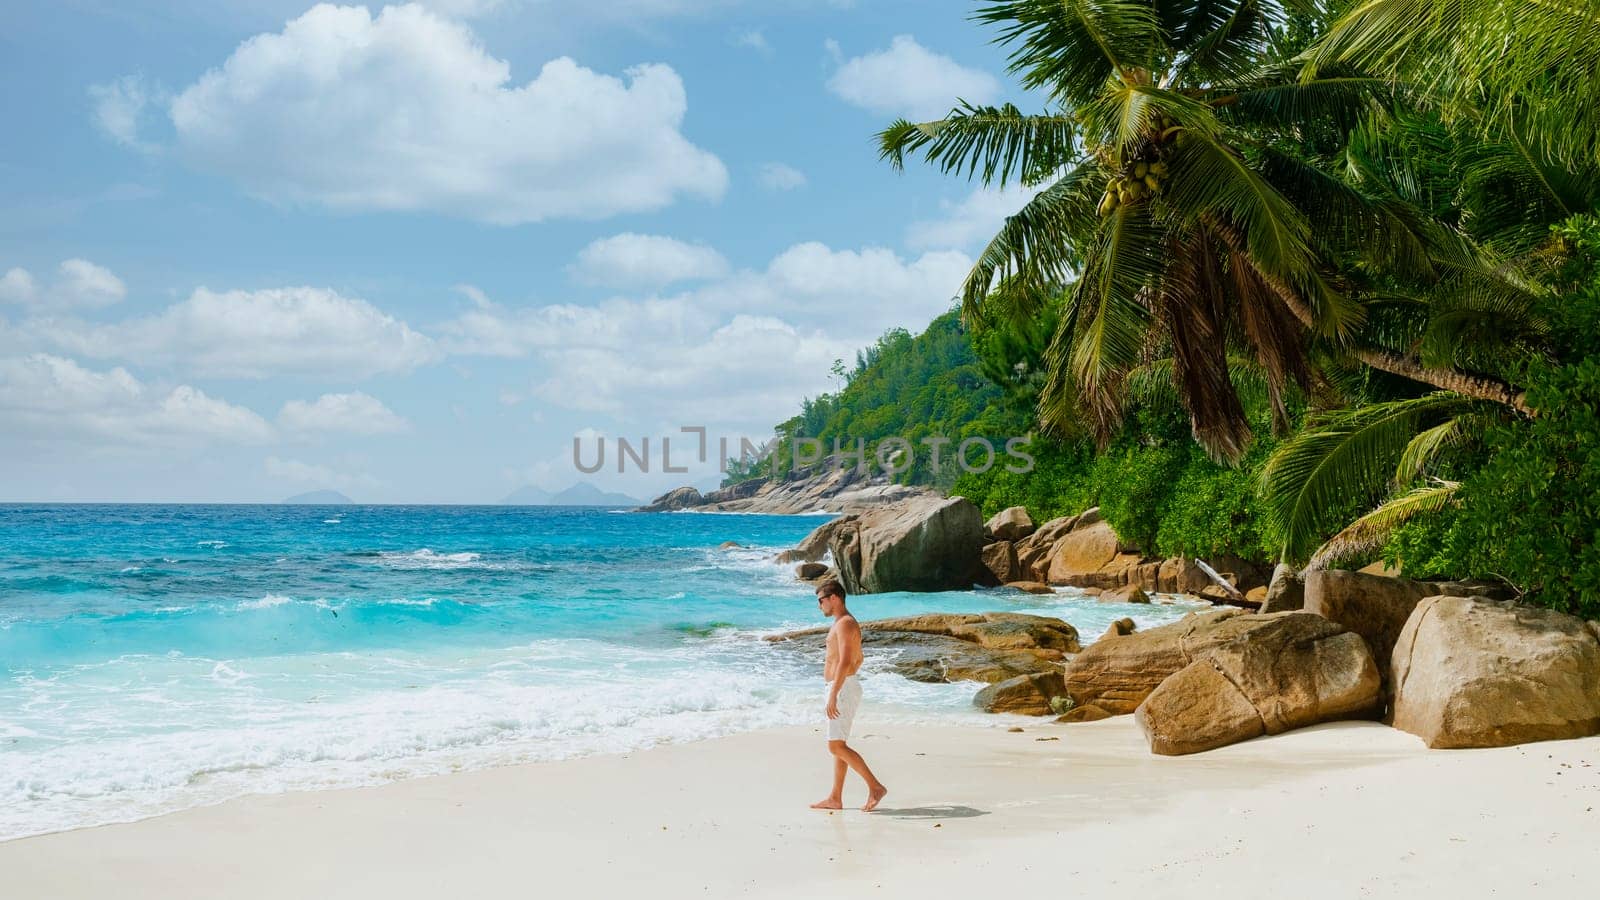 Young men in swimshort on a white tropical beach with palm trees Petite Anse beach Mahe Seychelles by fokkebok